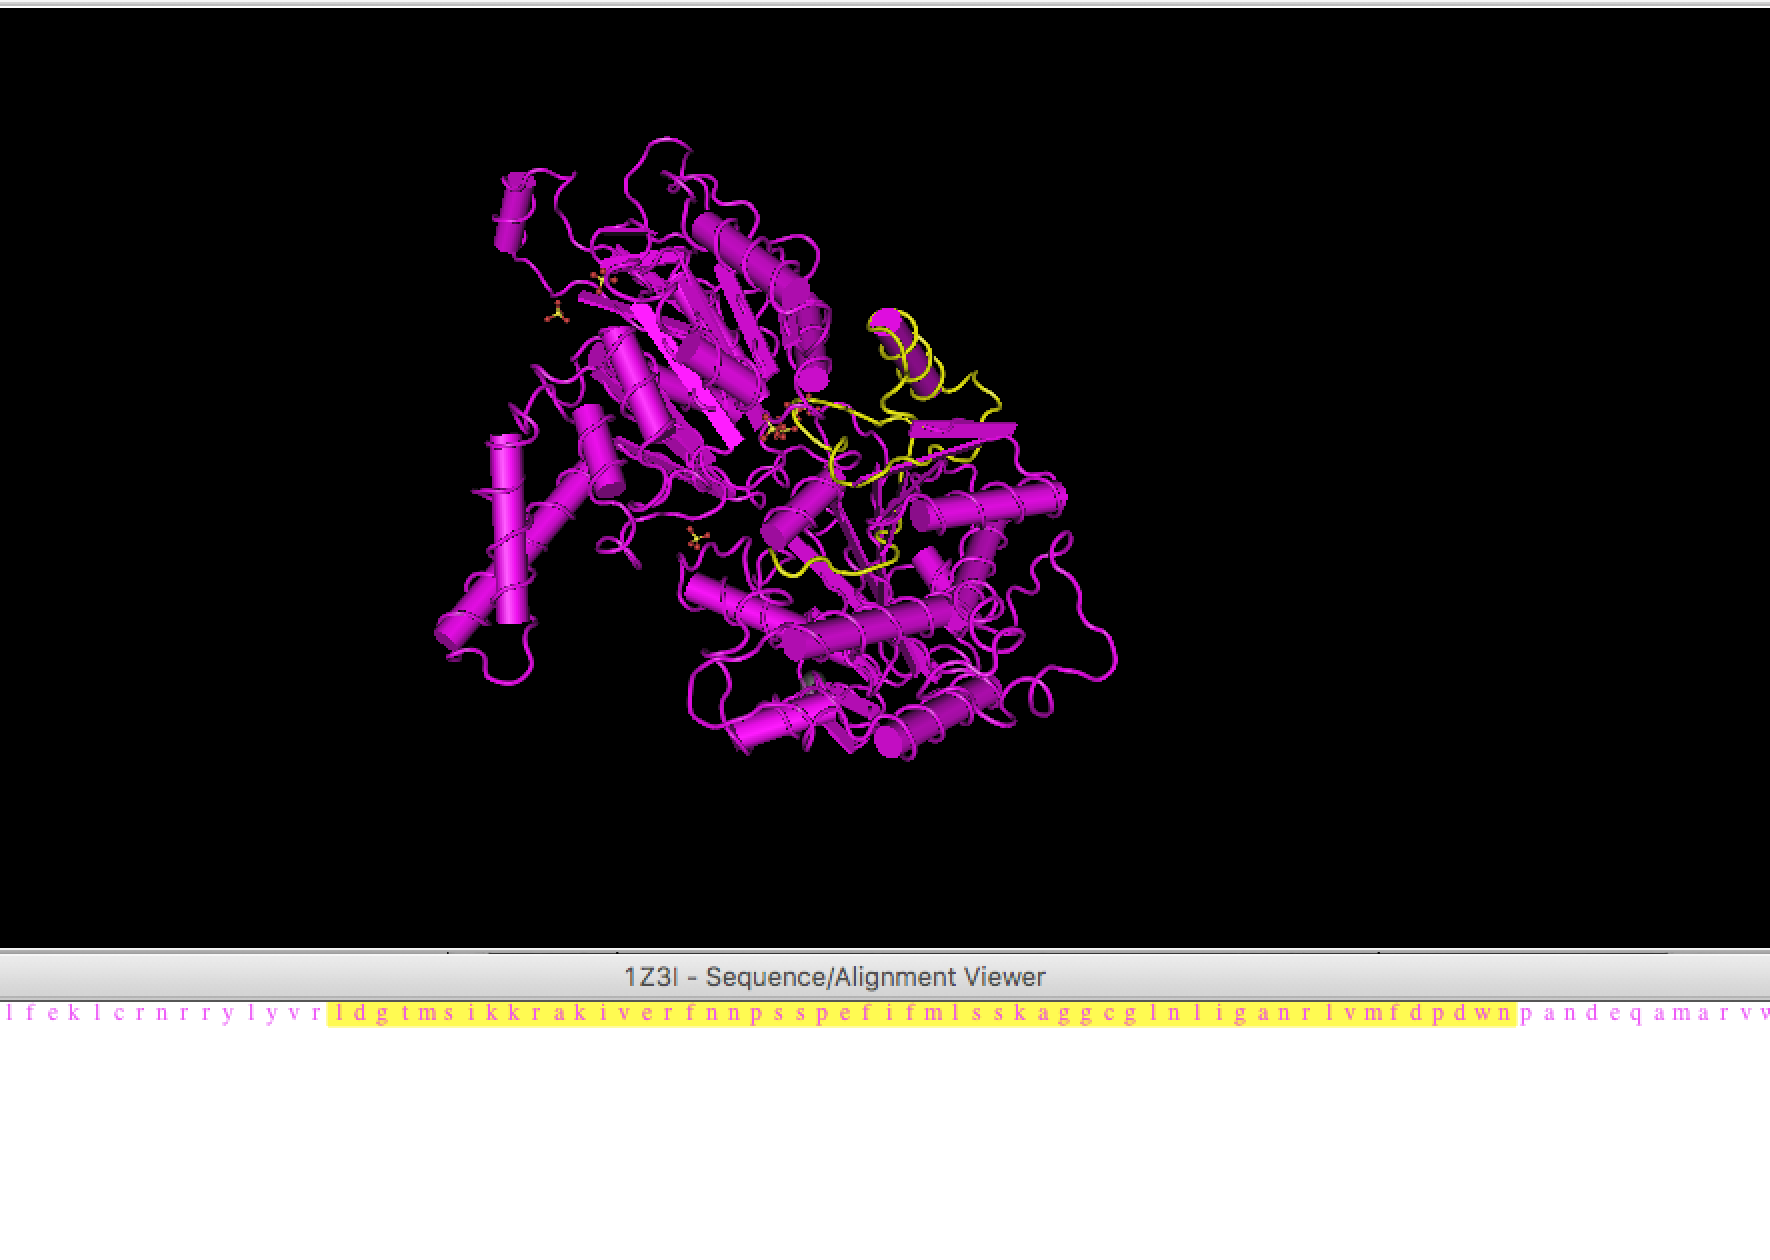 _images/protein_struct_8.png